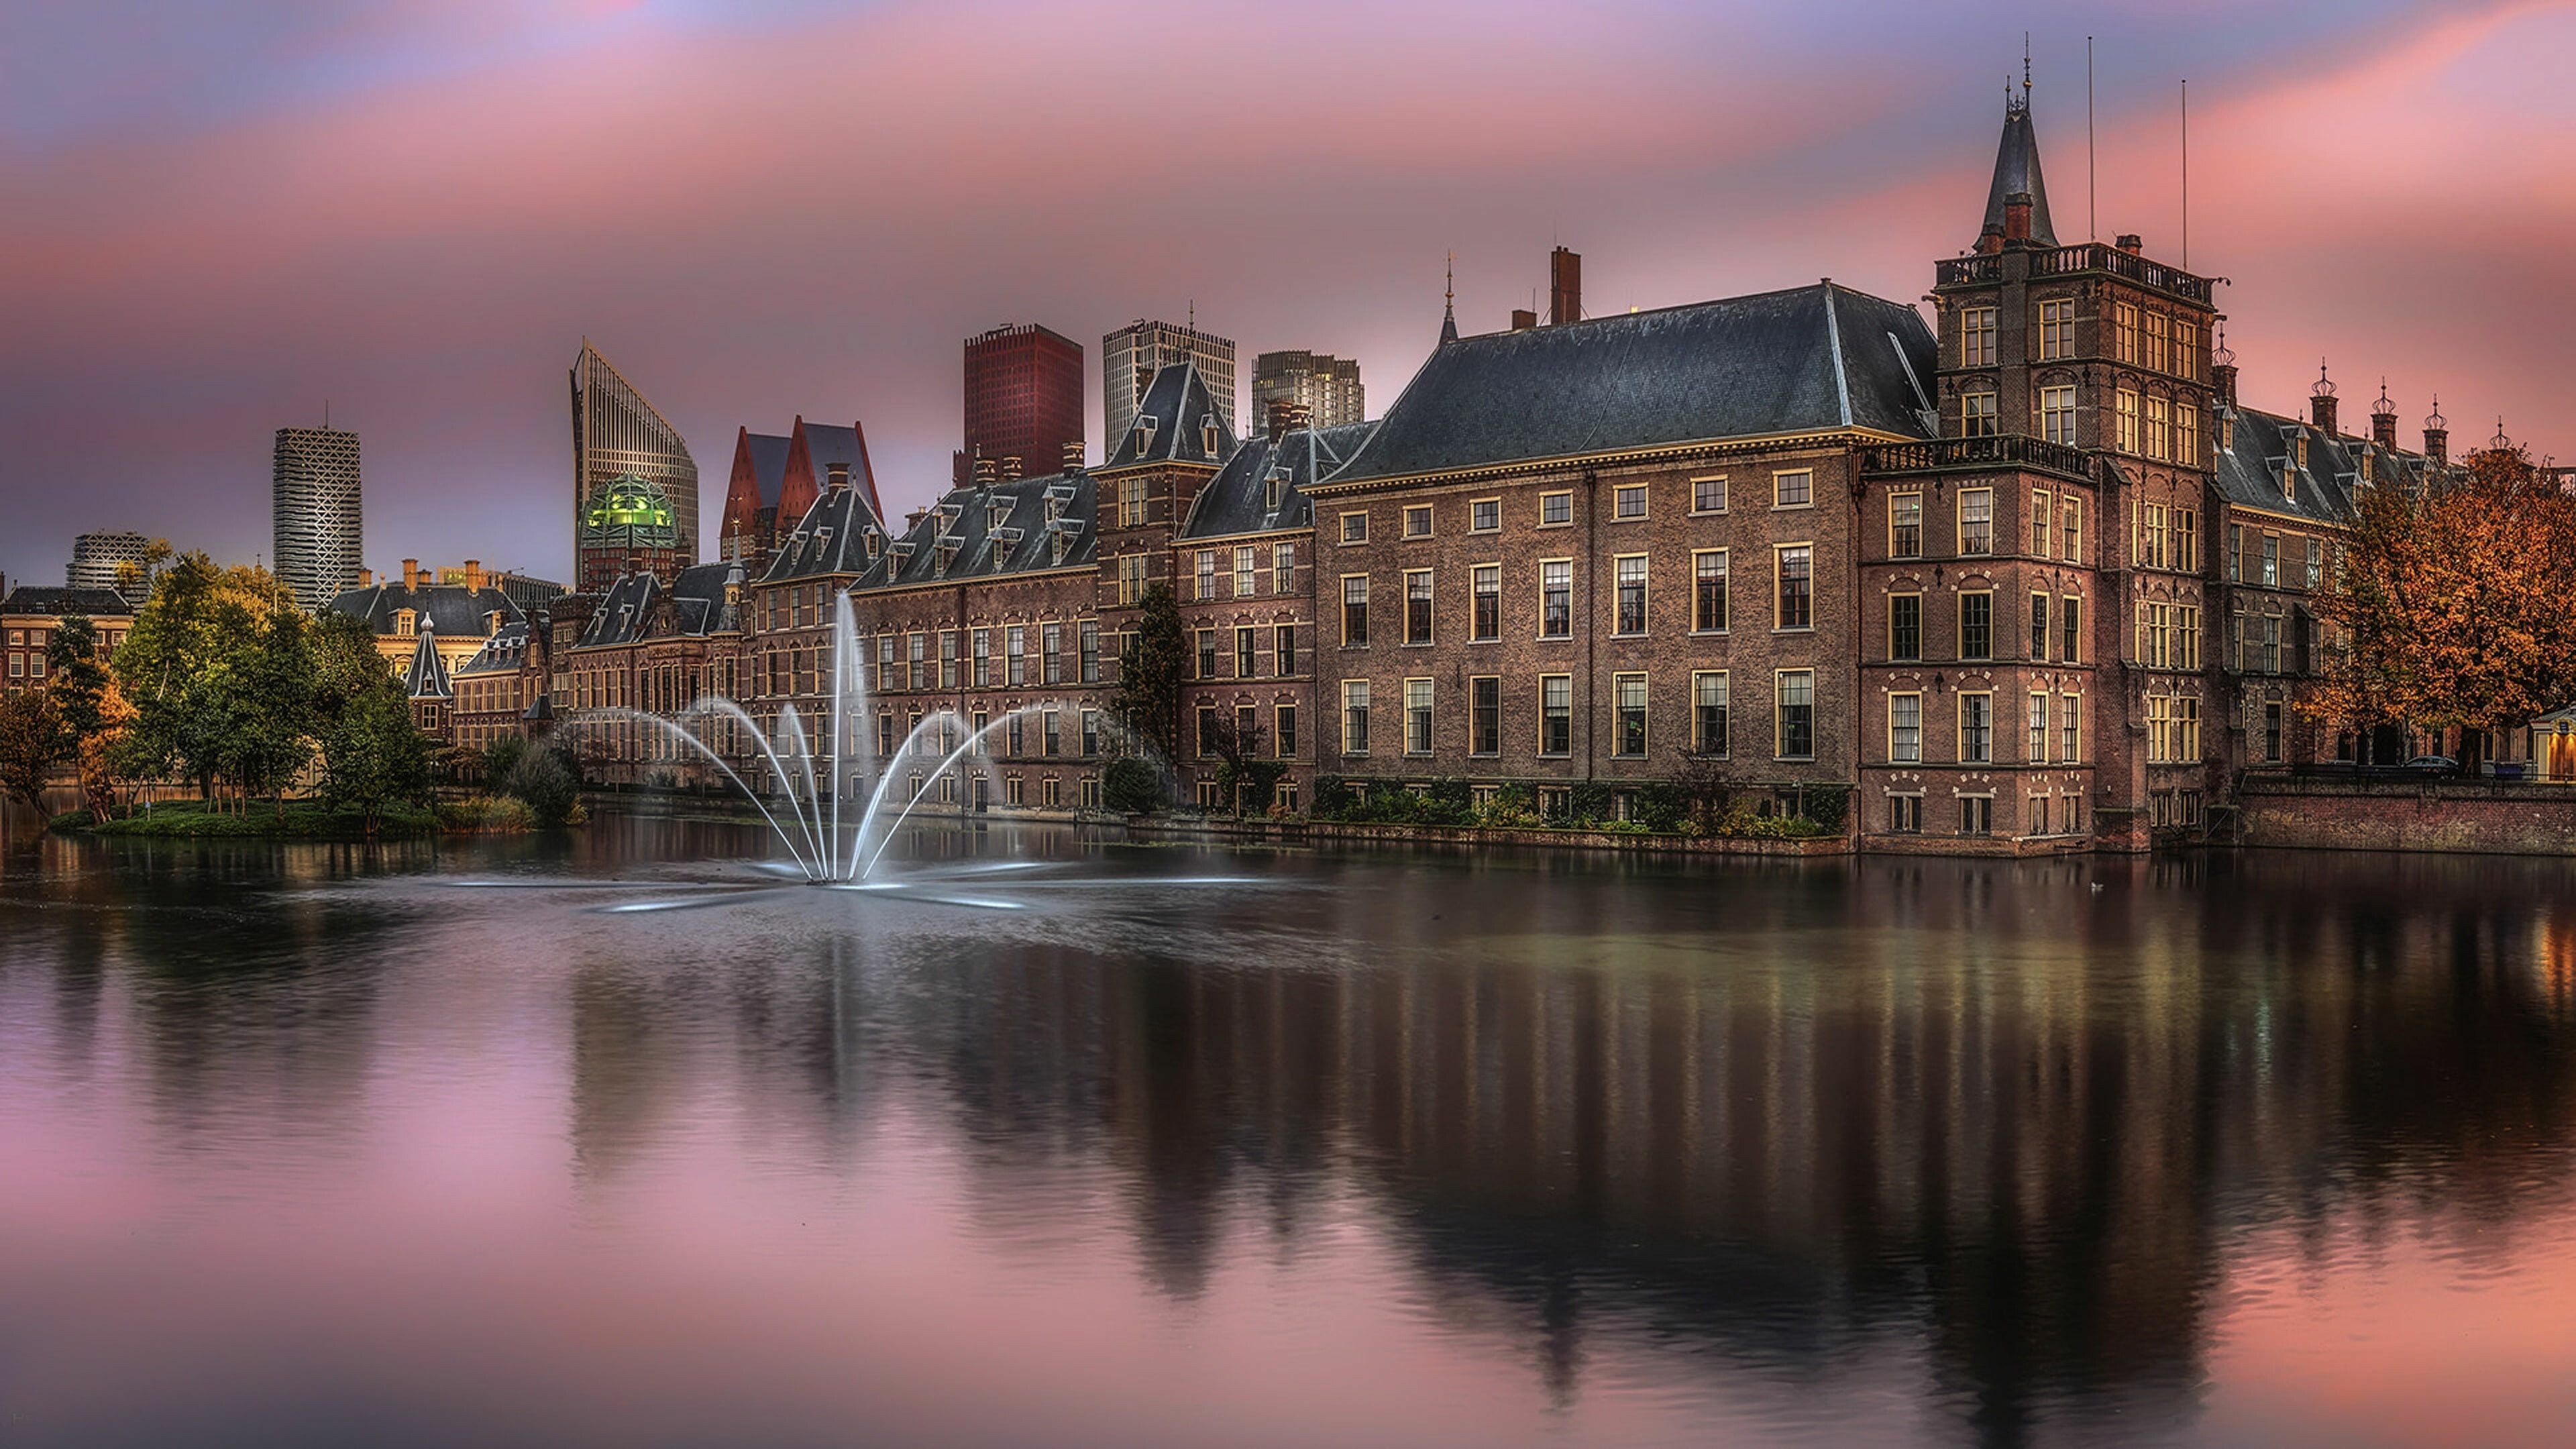 Netherlands: A country in northwestern Europe, Known for a flat landscape of canals, Binnenhof. 3840x2160 4K Background.